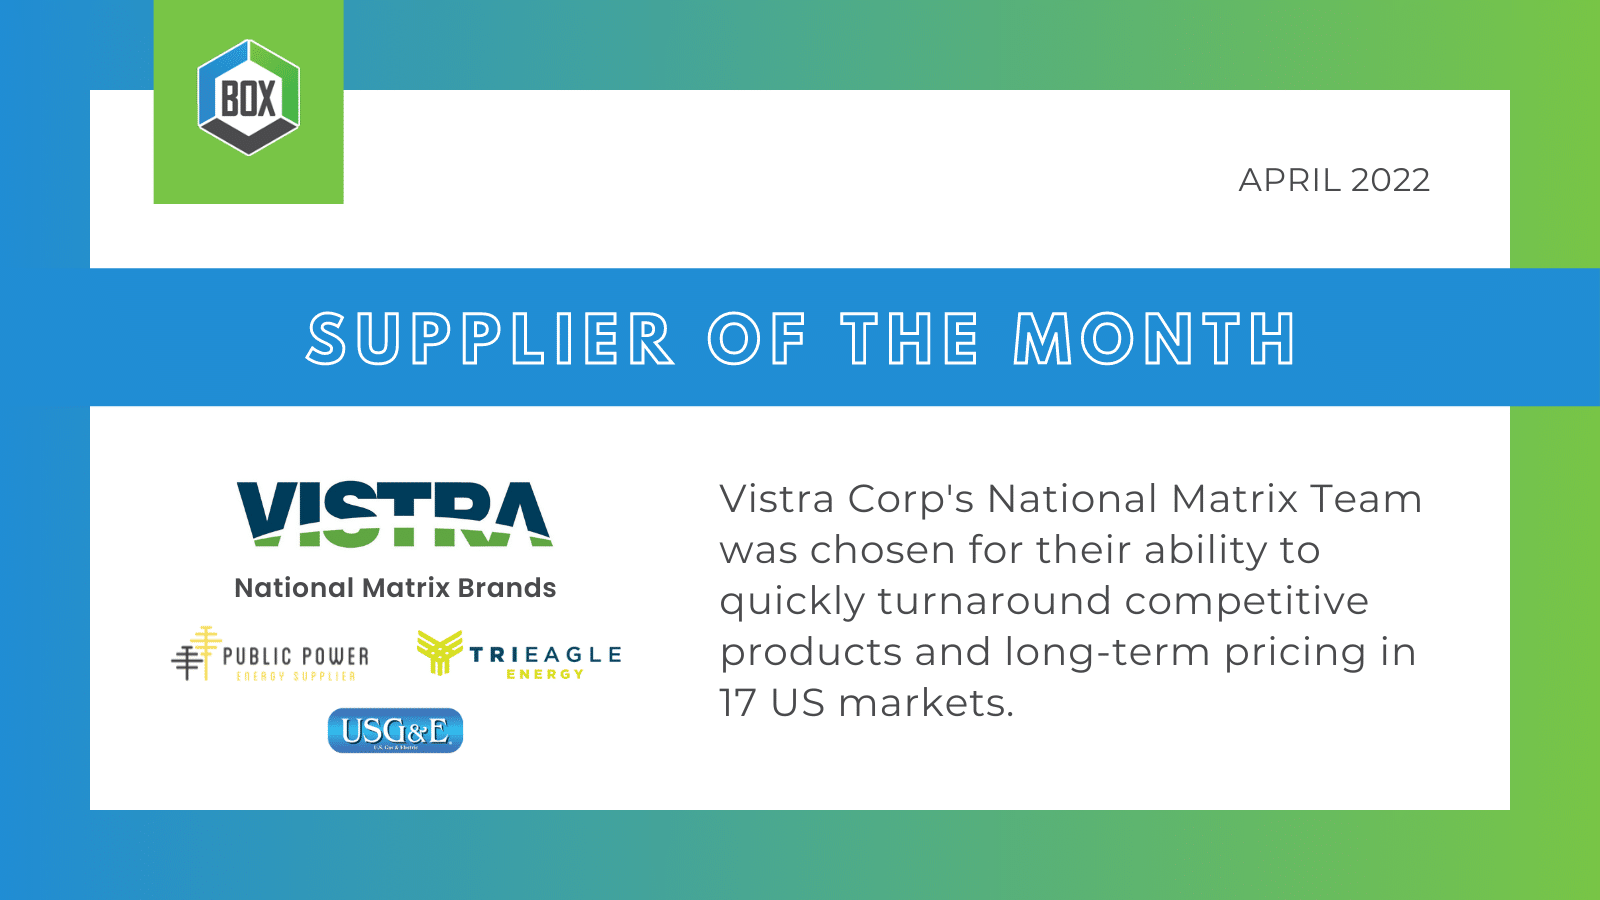 BOX Energy Supplier of the Month Vistra Corp